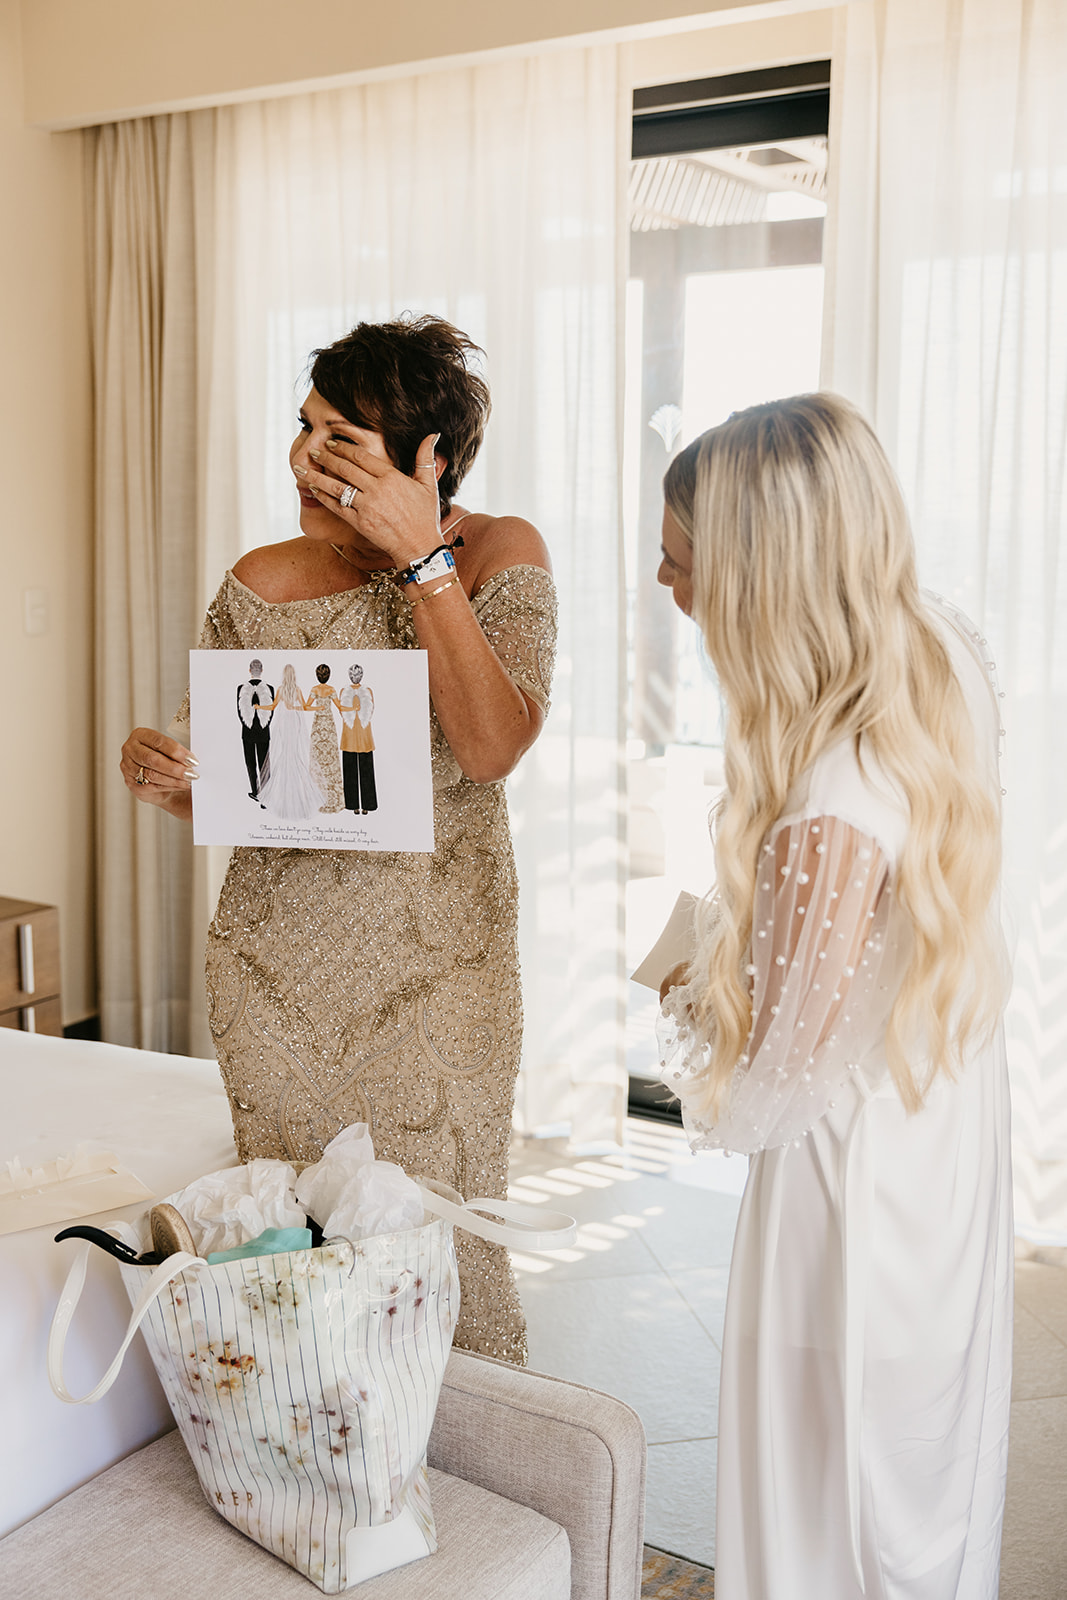 Bride gifts custom, sentimental watercolor painting to her mom on the bride's wedding day